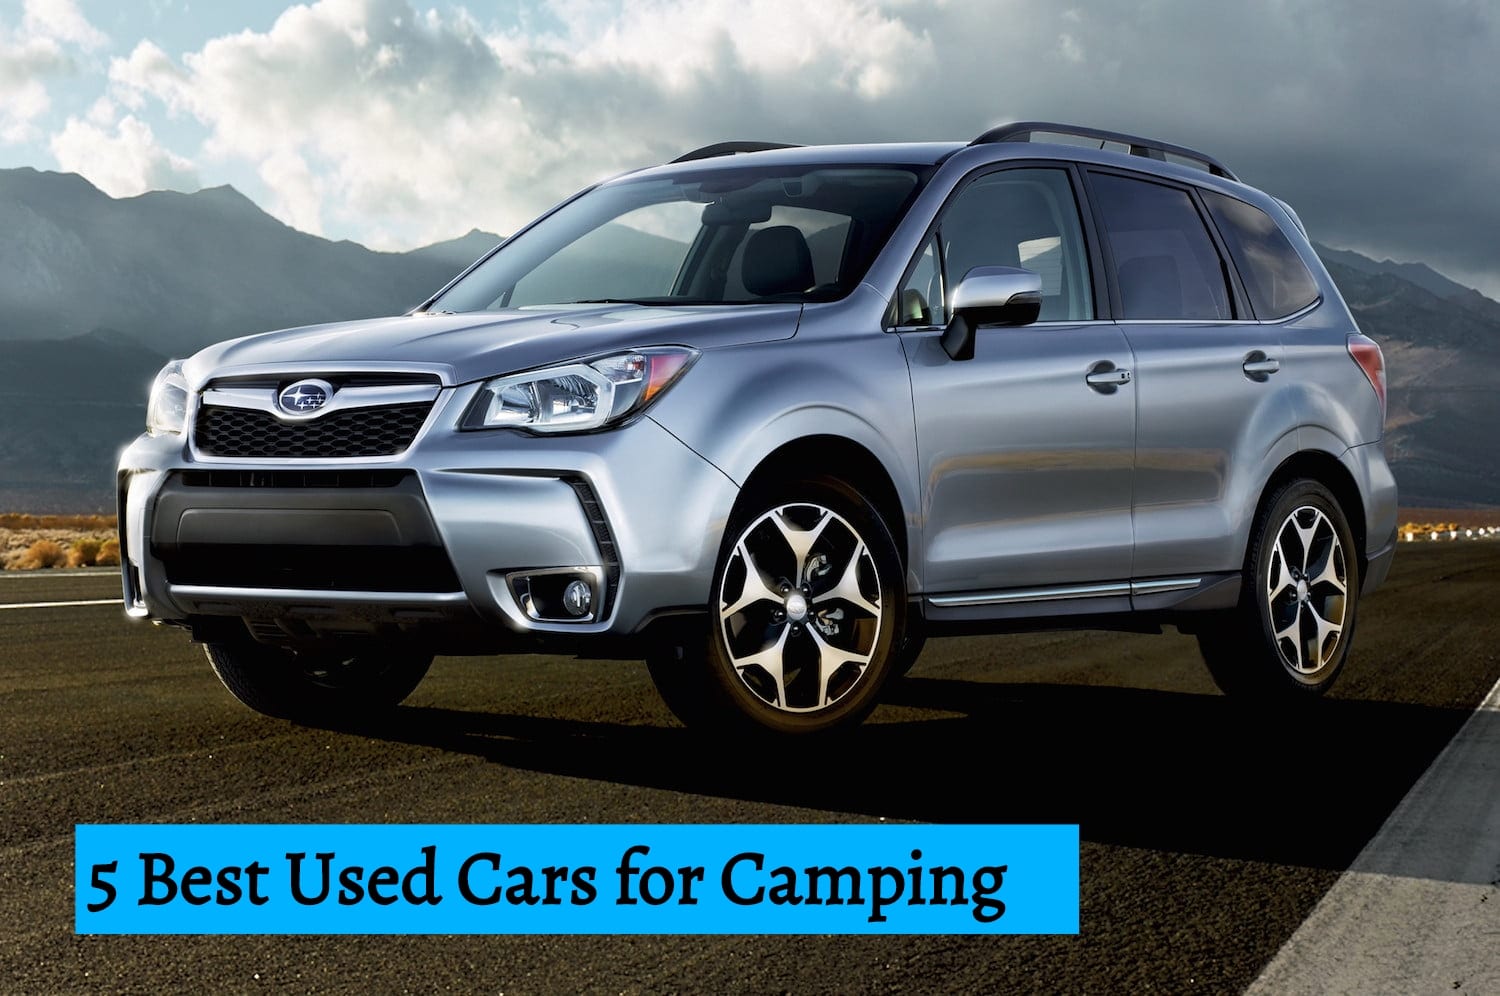 5 Best Used Cars for Camping